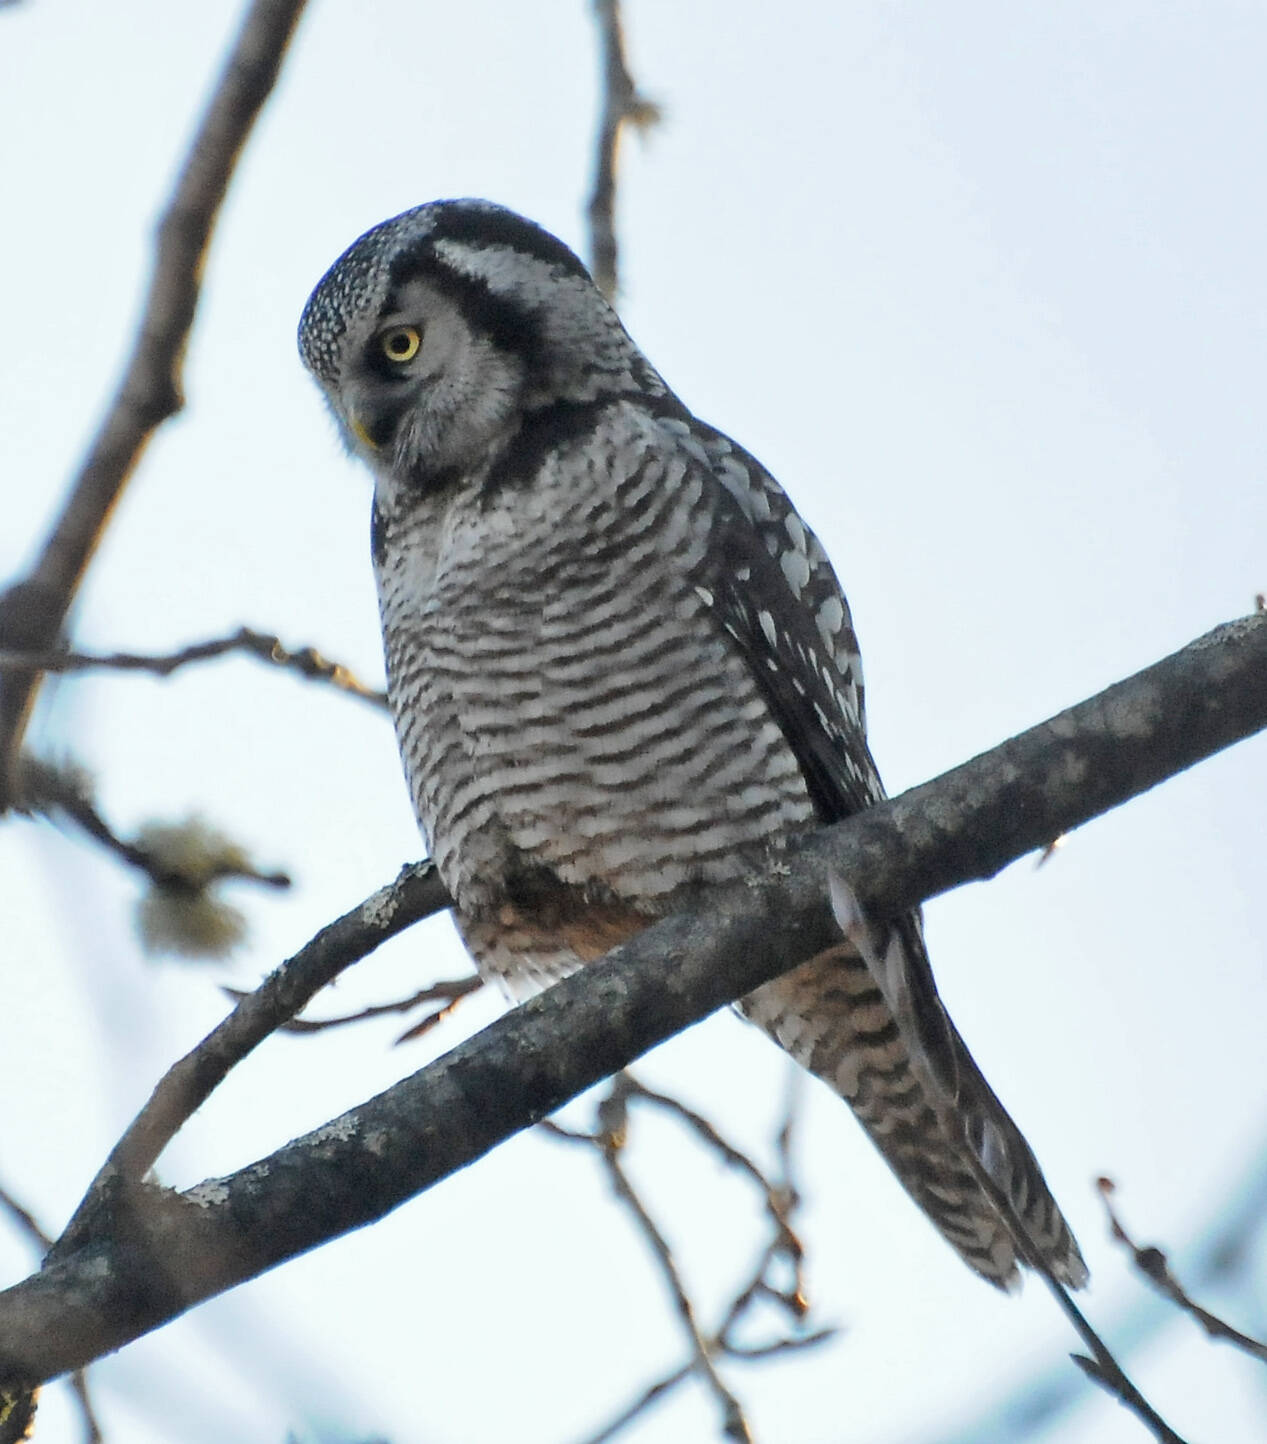 A hawk owl surveys the ground around its perch; note the white patches on the side of the head and the facial disc. (Courtesy Photo / Bob Armstrong)